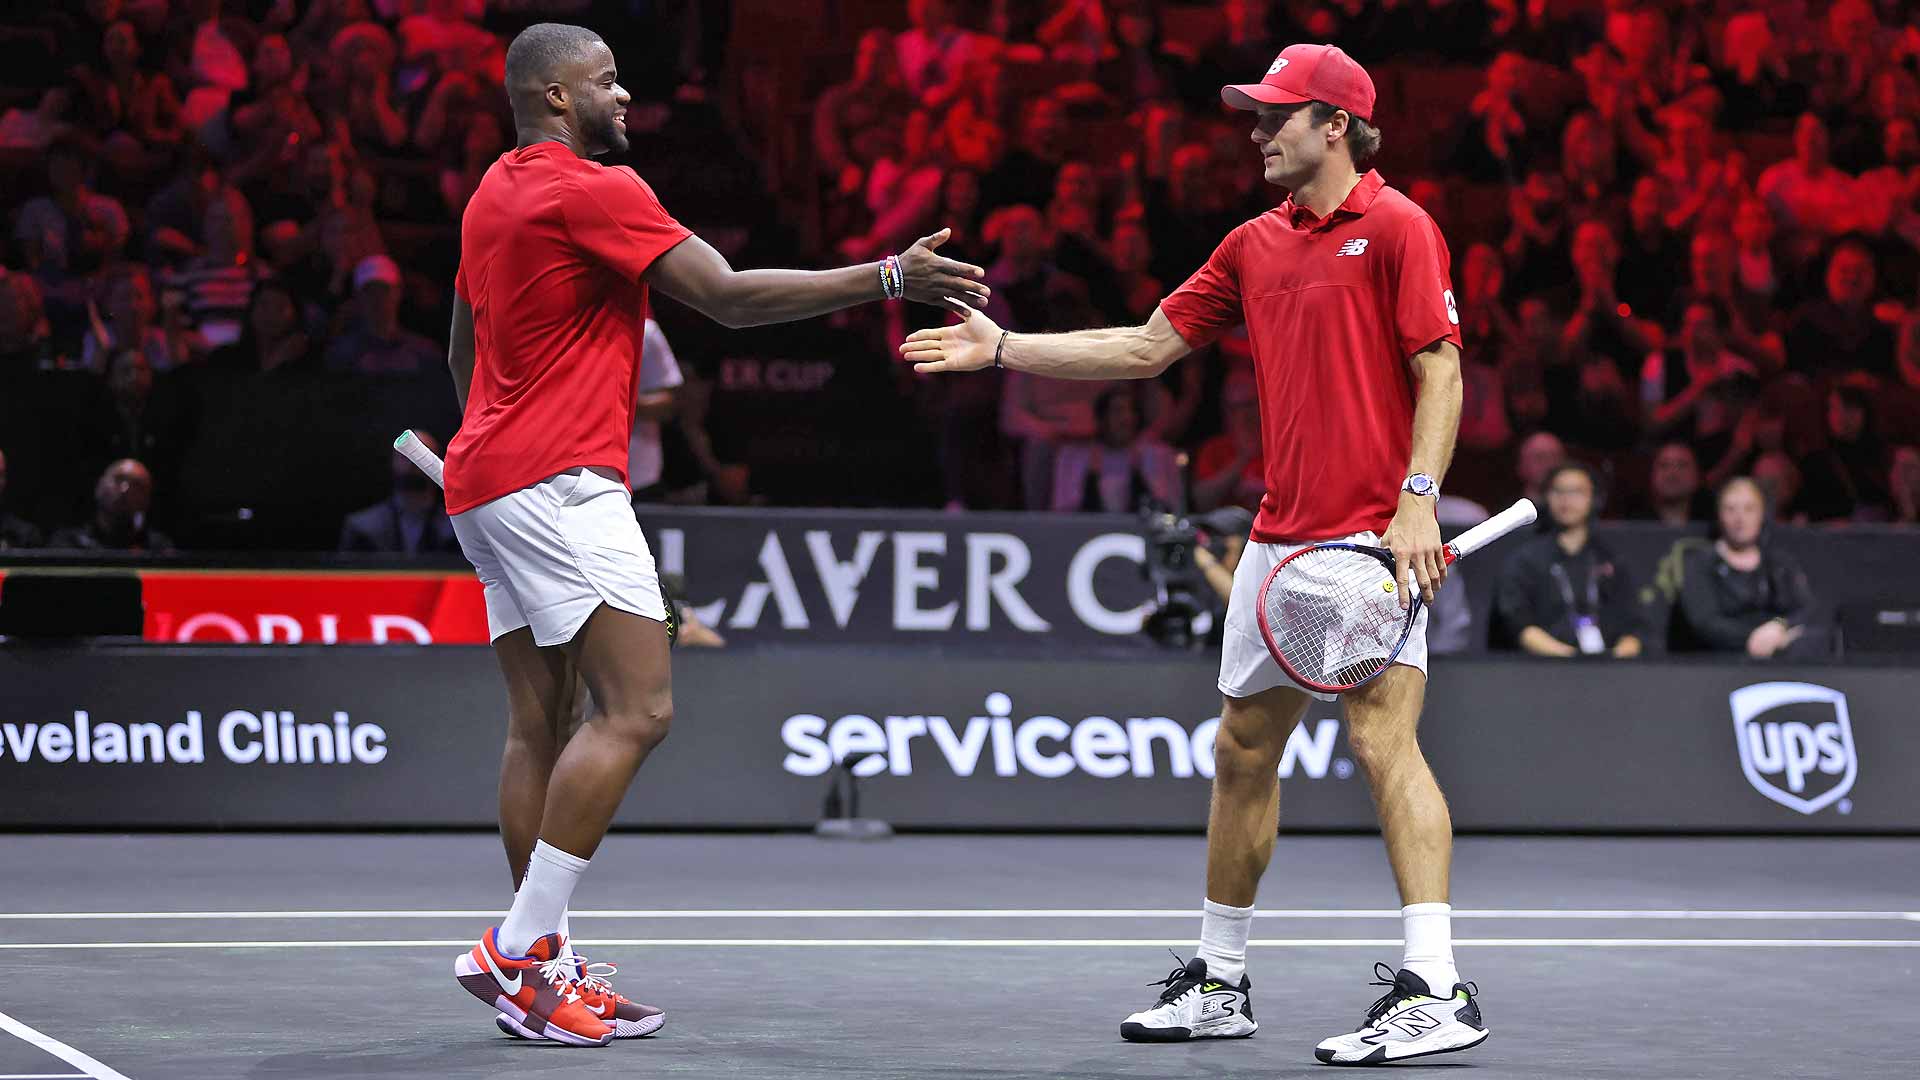 Team World Completes Clean Sweep On Day 1 At Laver Cup ATP Tour Tennis